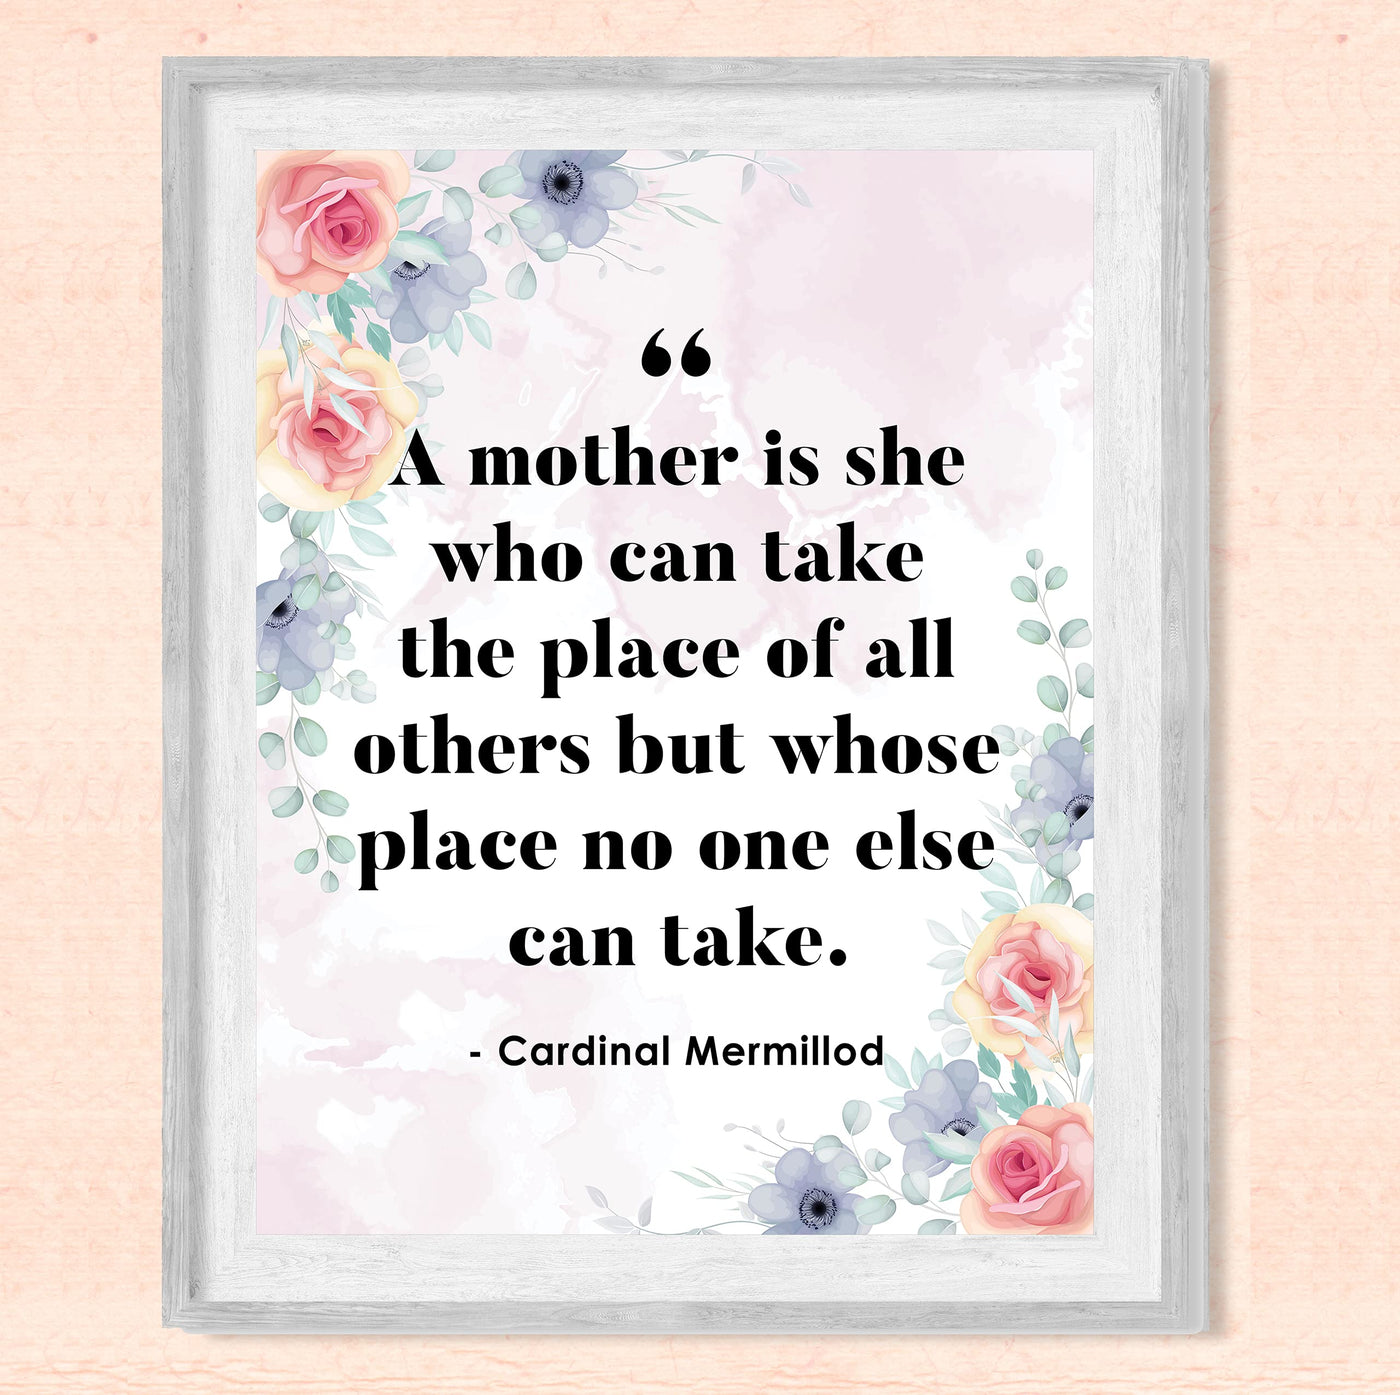 A Mother Is She Who Can Take the Place of All Others-Inspirational Family Wall Art-8 x 10" Floral Wall Print-Ready to Frame. Loving Home-Office-Church Decor. Lifetime Keepsake Gift for All Mothers!